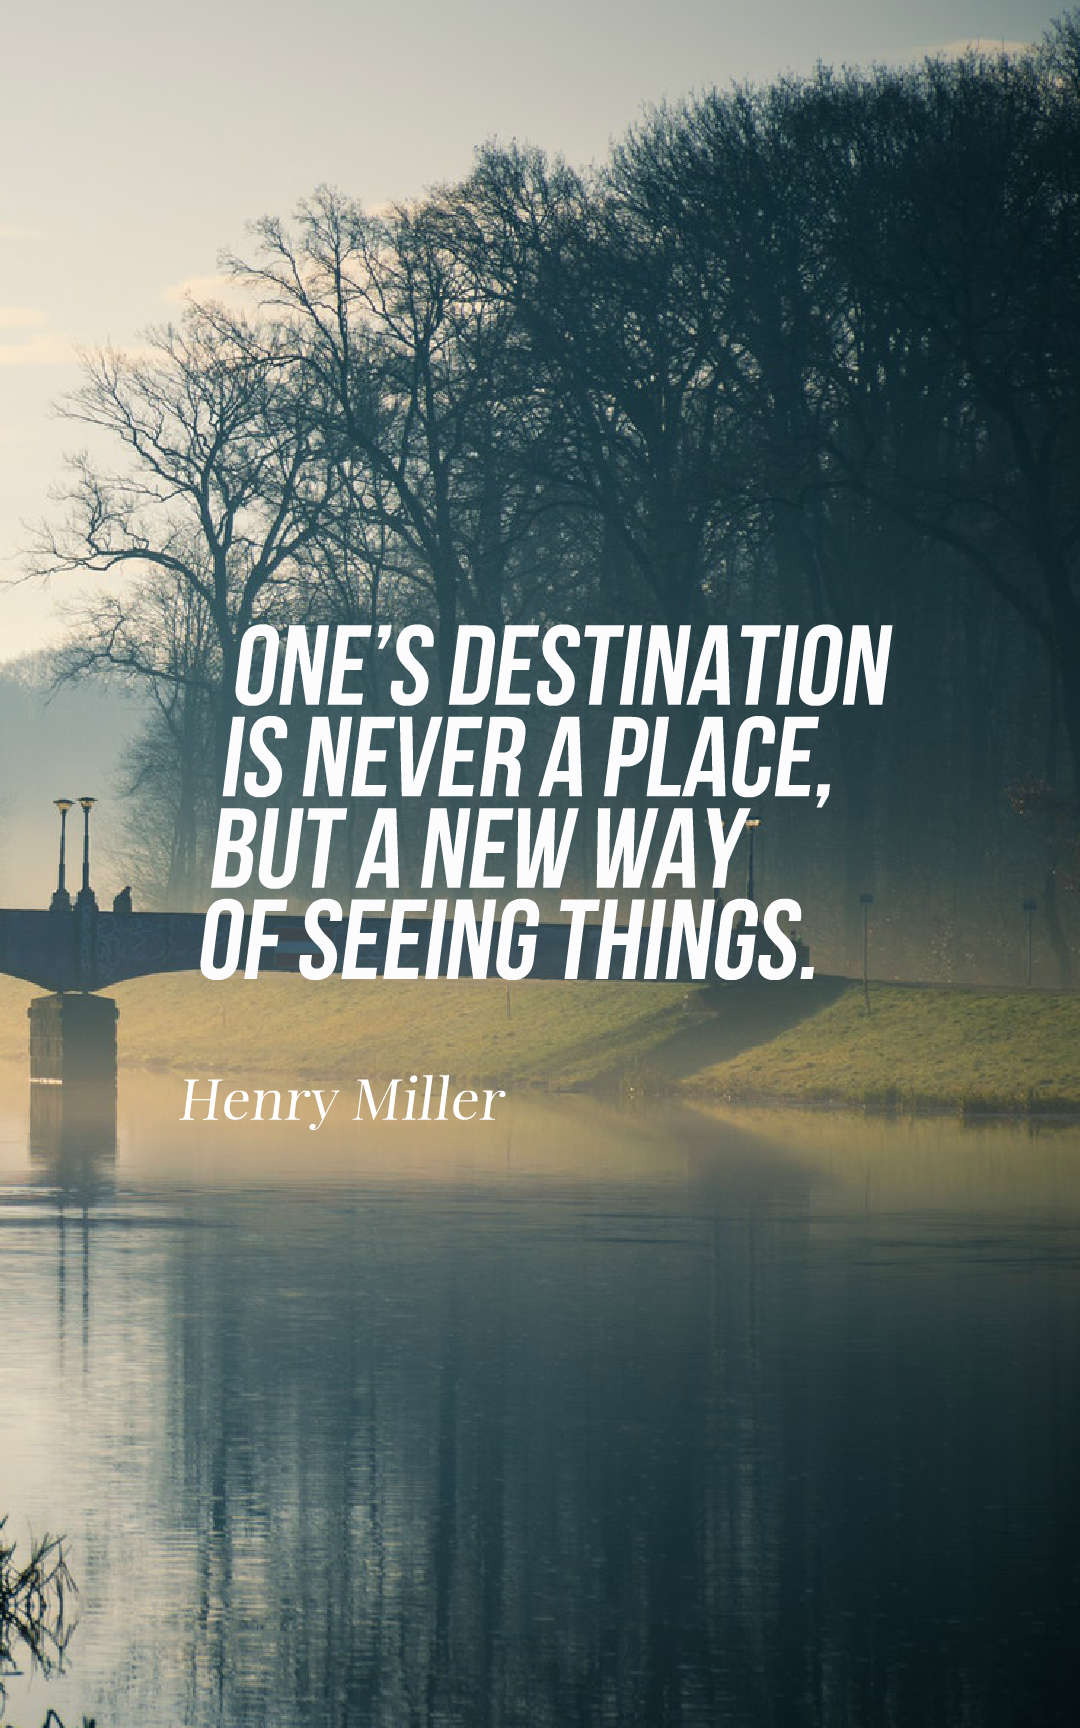 One’s destination is never a place, but a new way of seeing things.